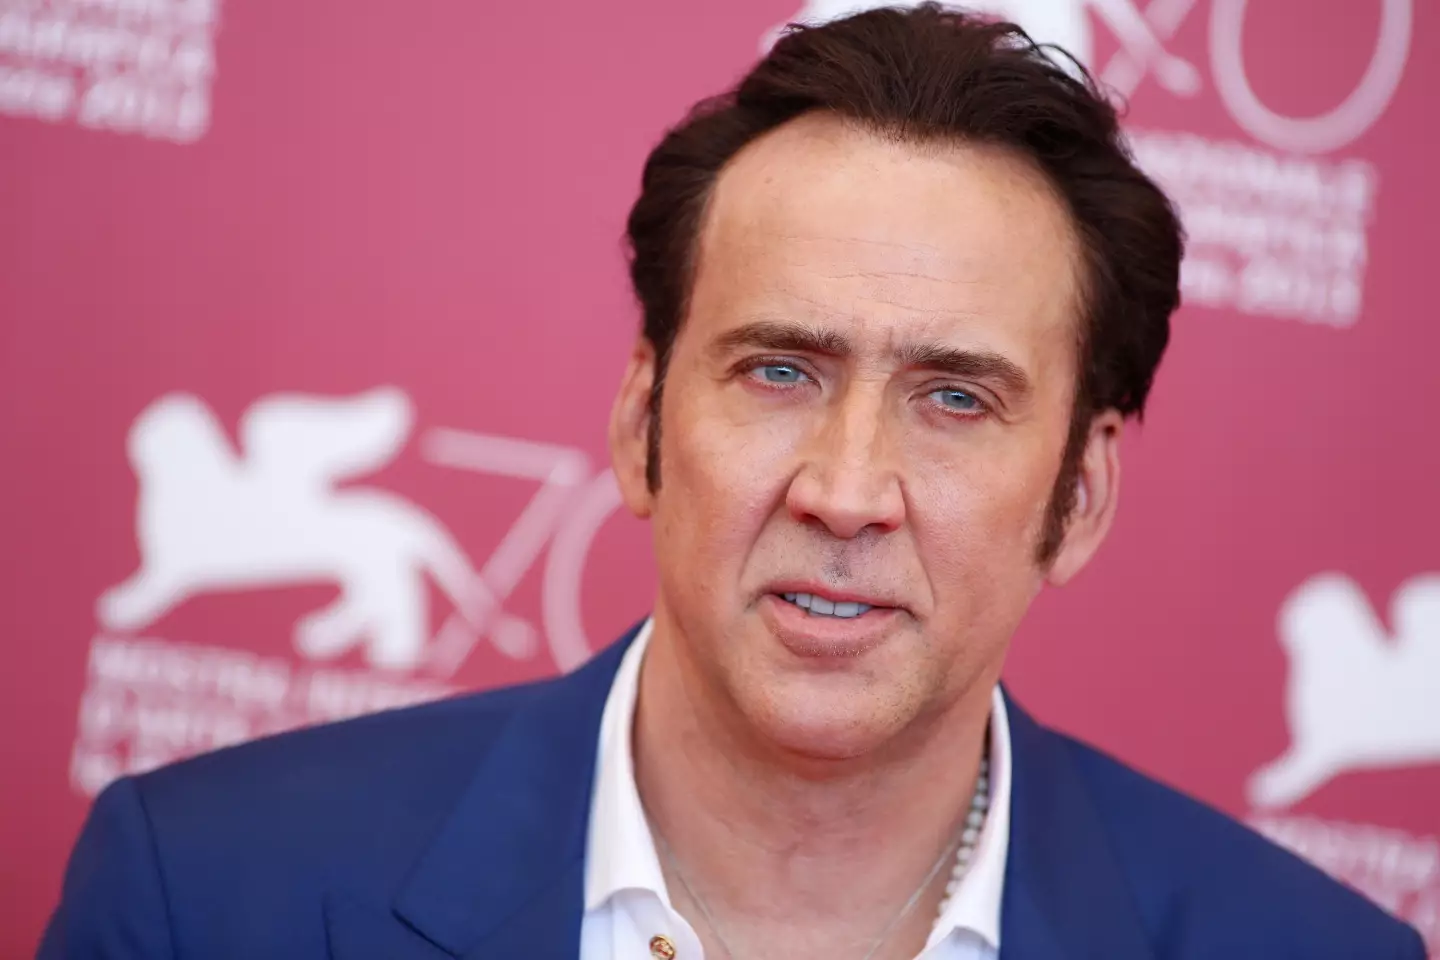 Cage has some big plans for a Face/Off sequel.